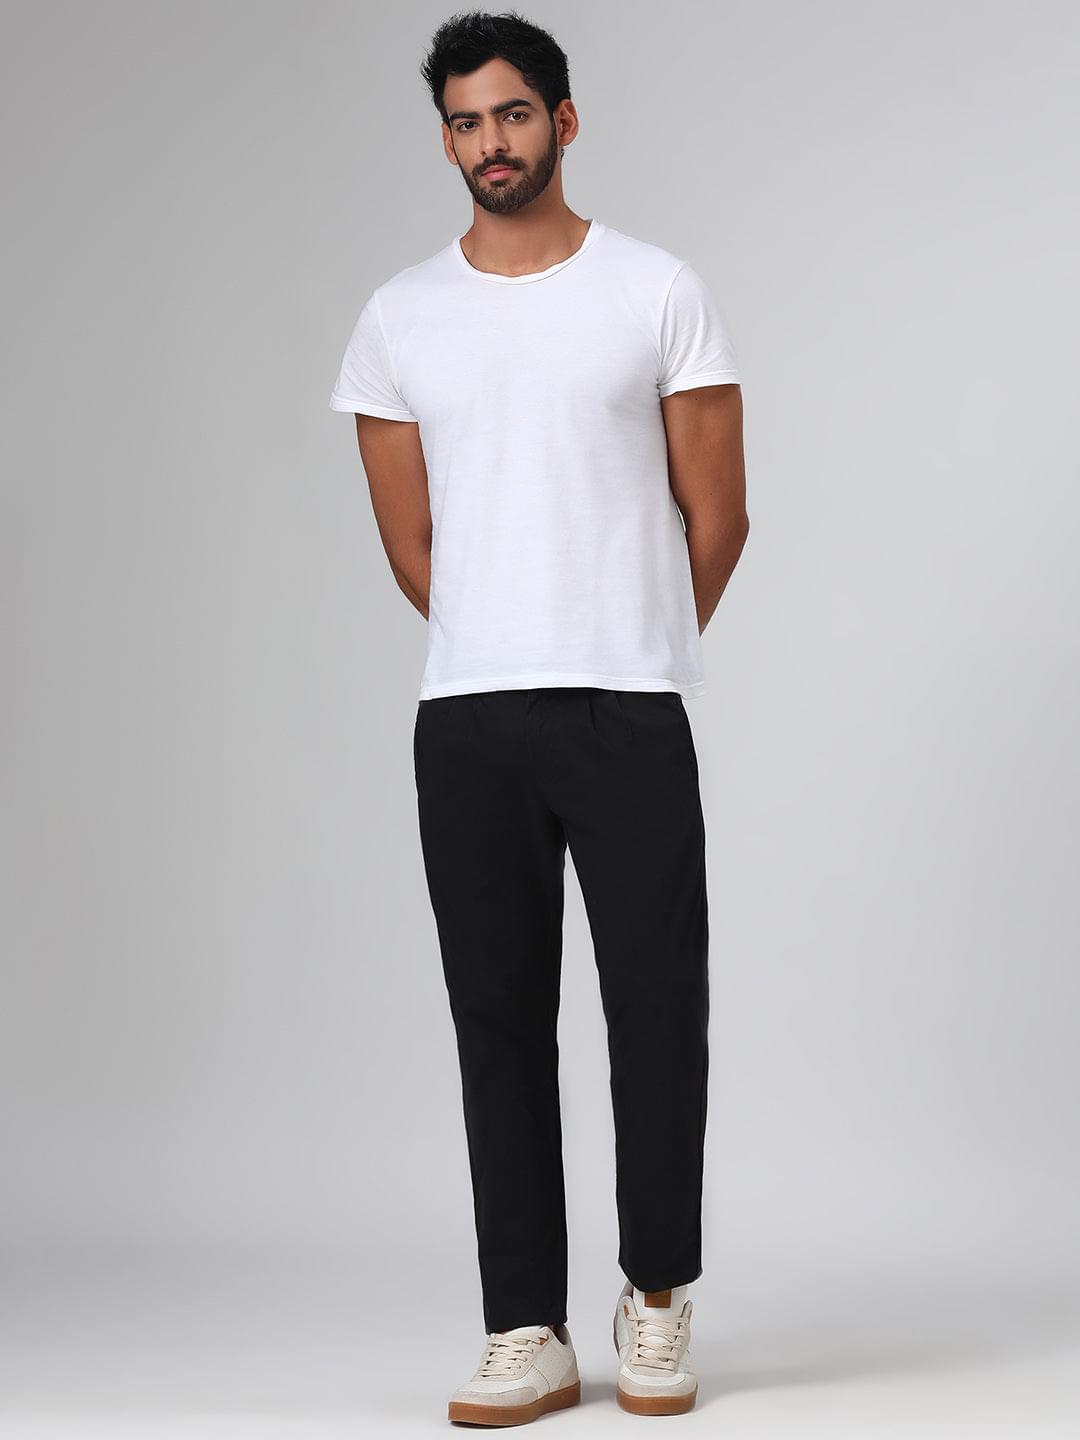 Organic Cotton Stretch Chino in Black- Comfort Fit